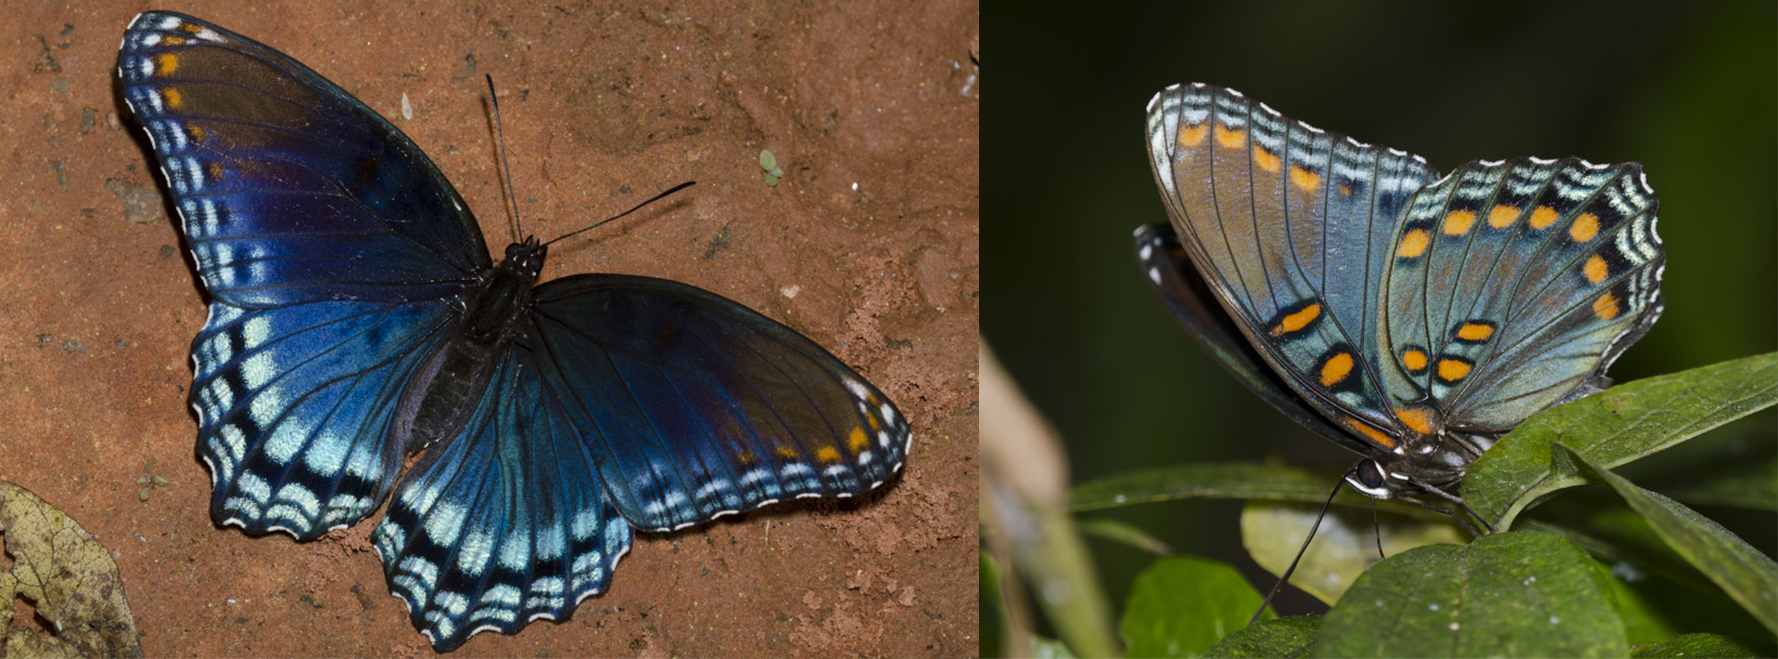 Dorsal and ventral views of the red-spotted purple butterfly are shown. The butterfly is a vivid blue, with some purple and orange patterning.